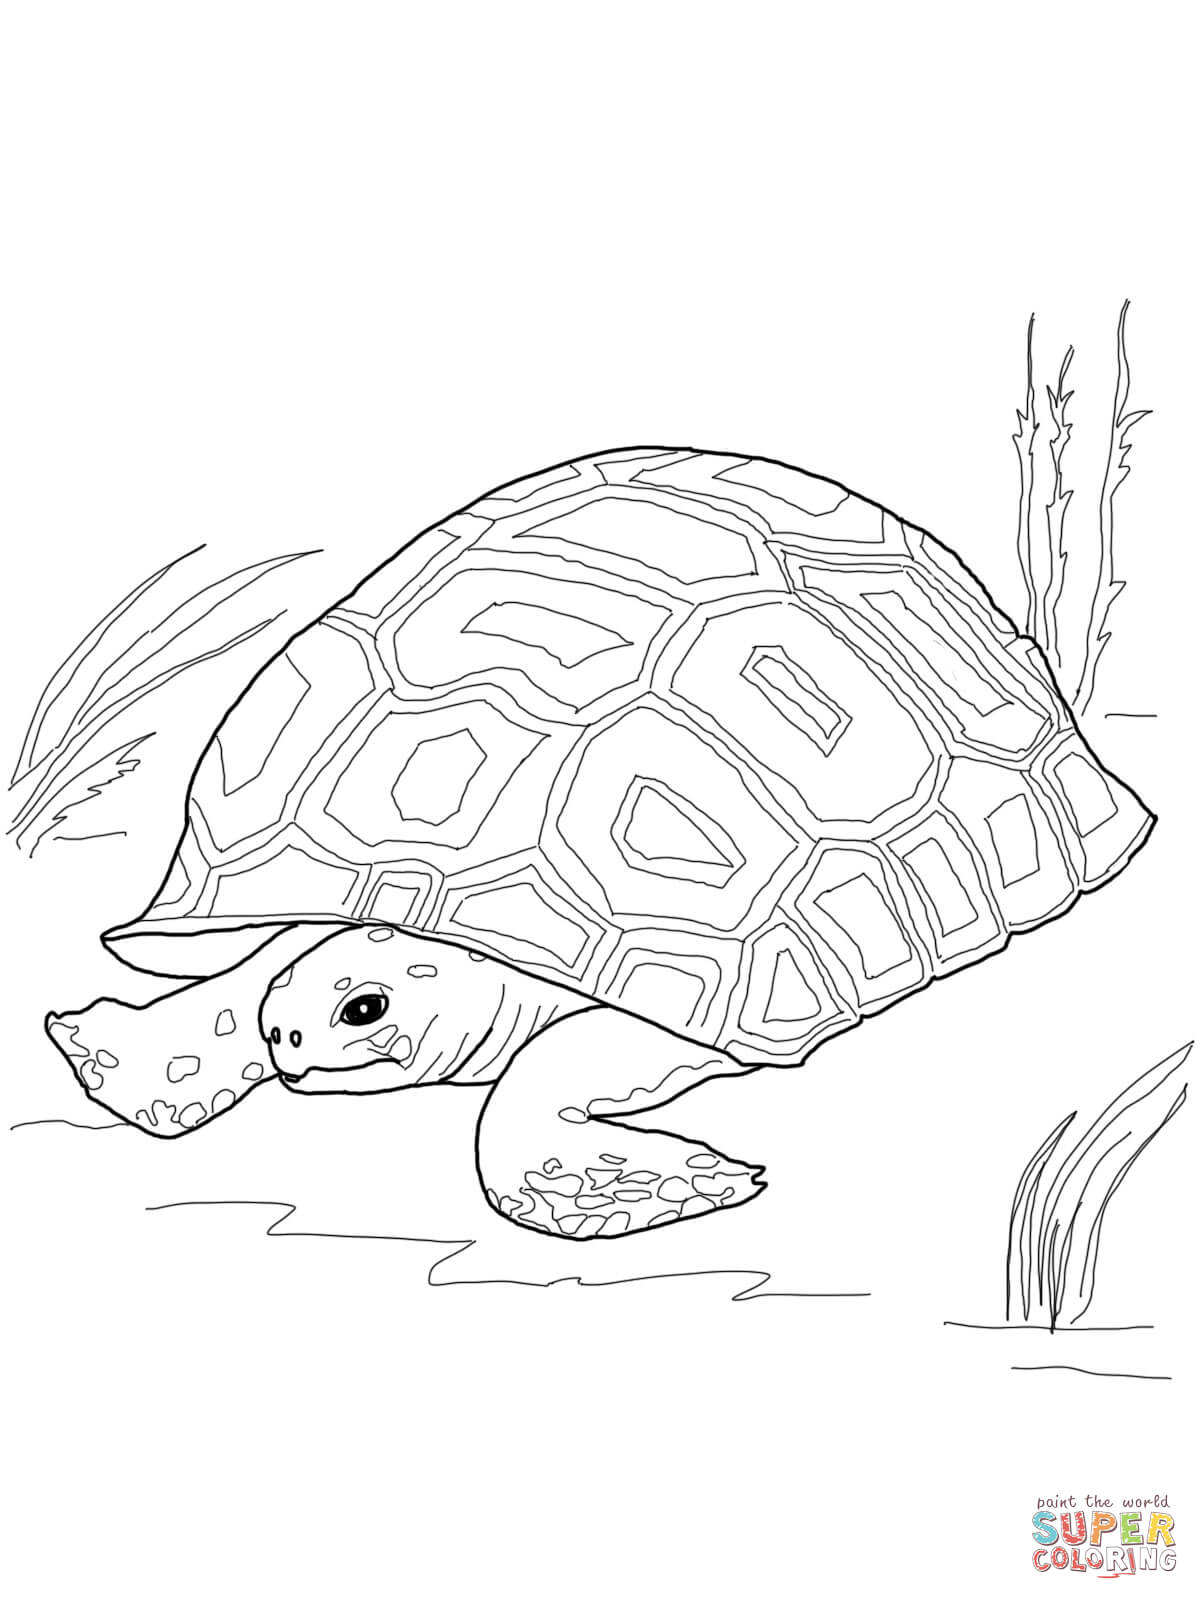 Gopher Tortoise coloring page | Free Printable Coloring Pages